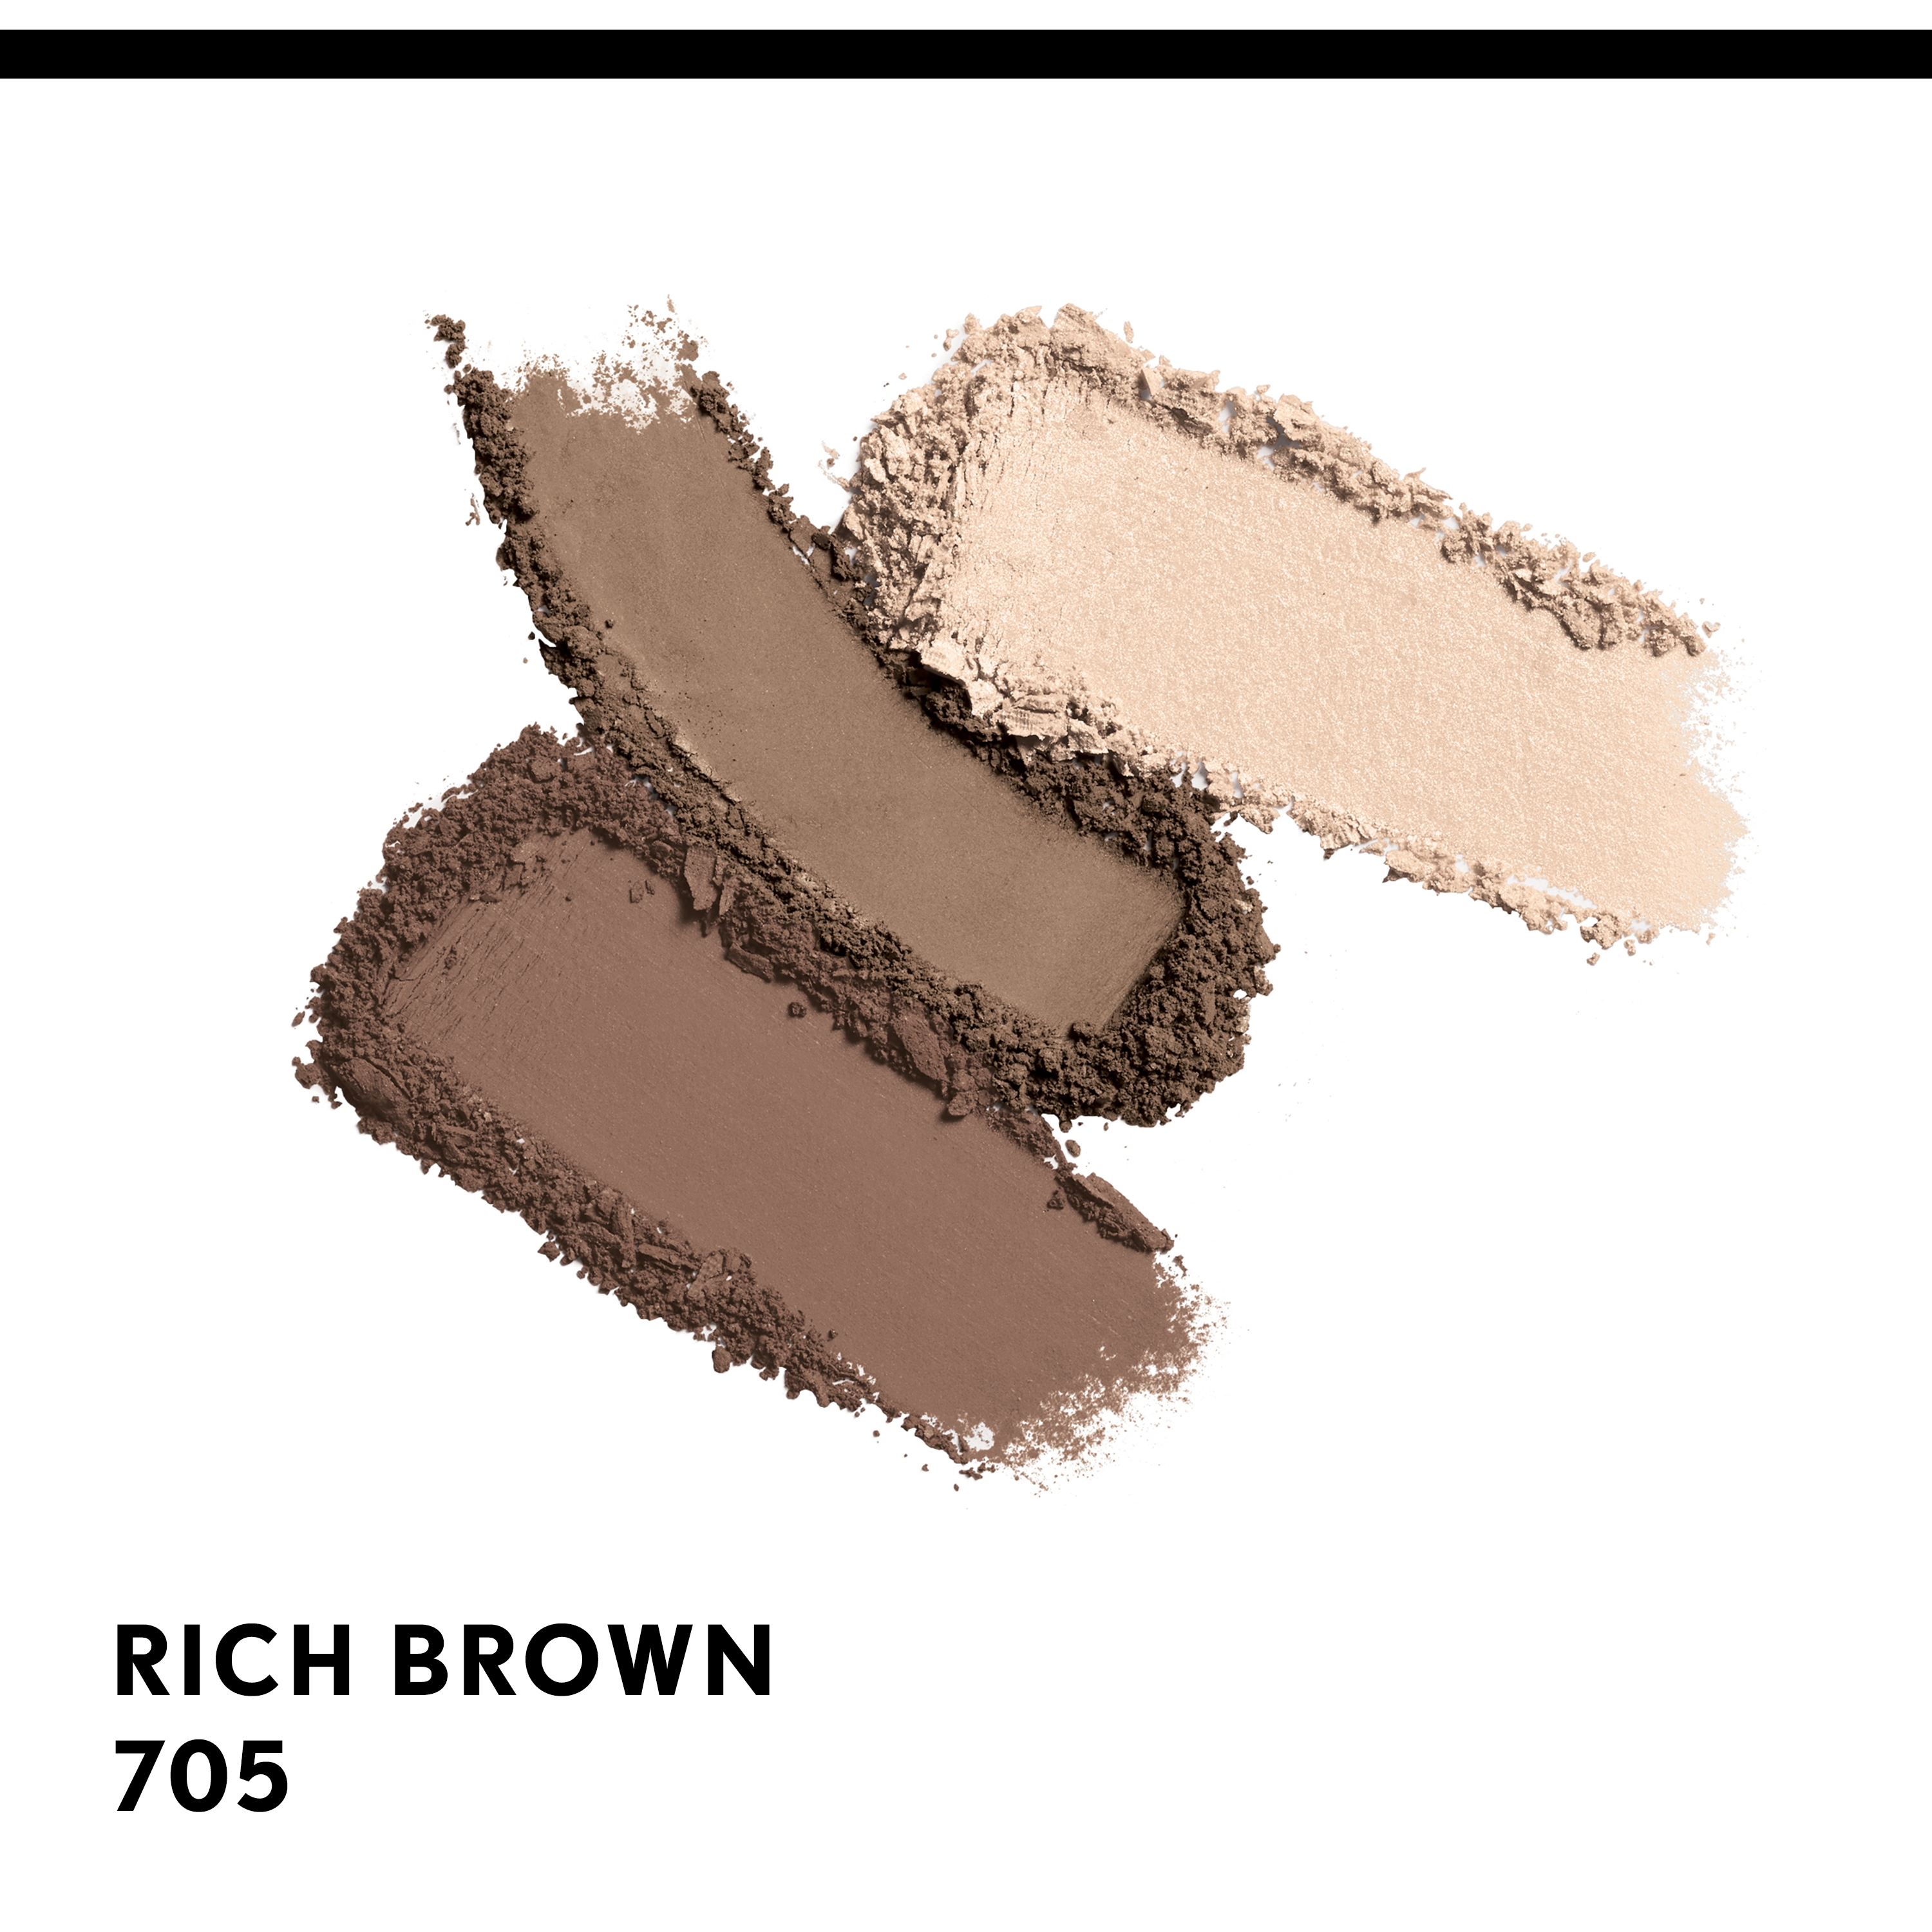 COVERGIRL Easy Breezy Brow Powder Kit, 705 Rich Brown, 0.008 oz, Eyebrow Powder, Eyebrow Kit, Eyebrow Powder Kit, Eyebrows, Includes Double-Ended Fluffy and Angeled Brush - image 2 of 8